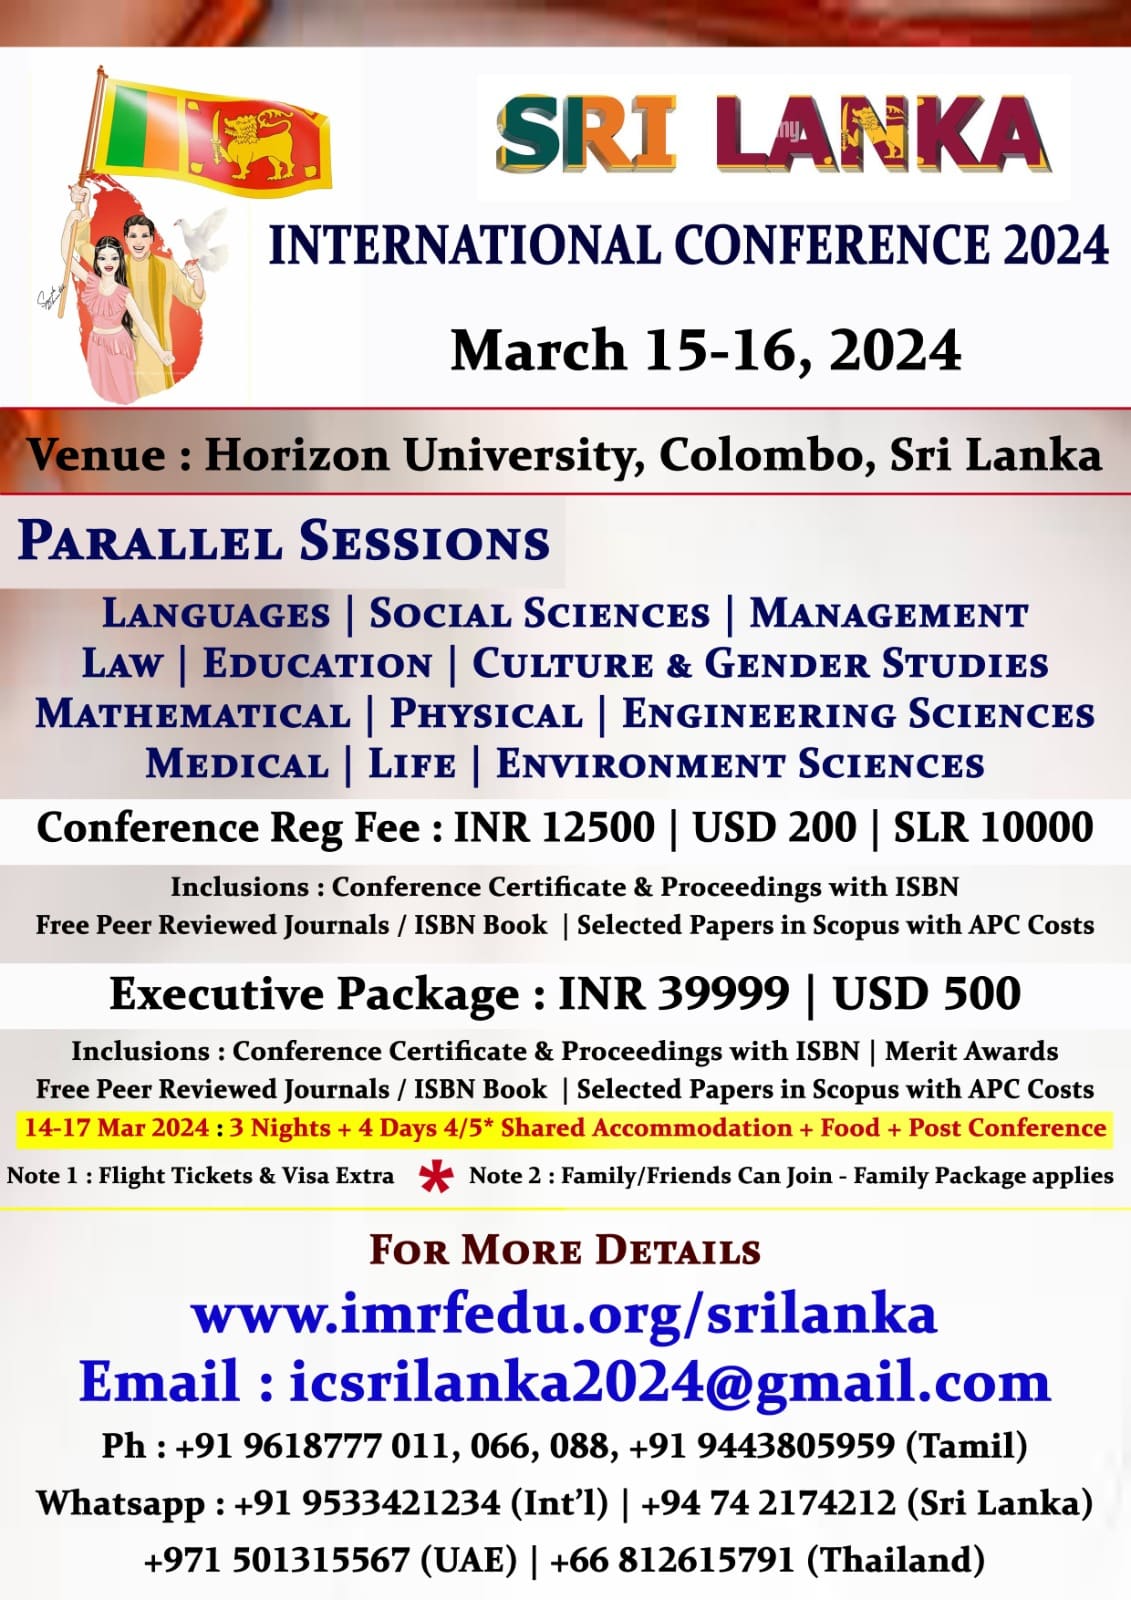 International Conference on Mathematical, Physical & Engineering Sciences 2024